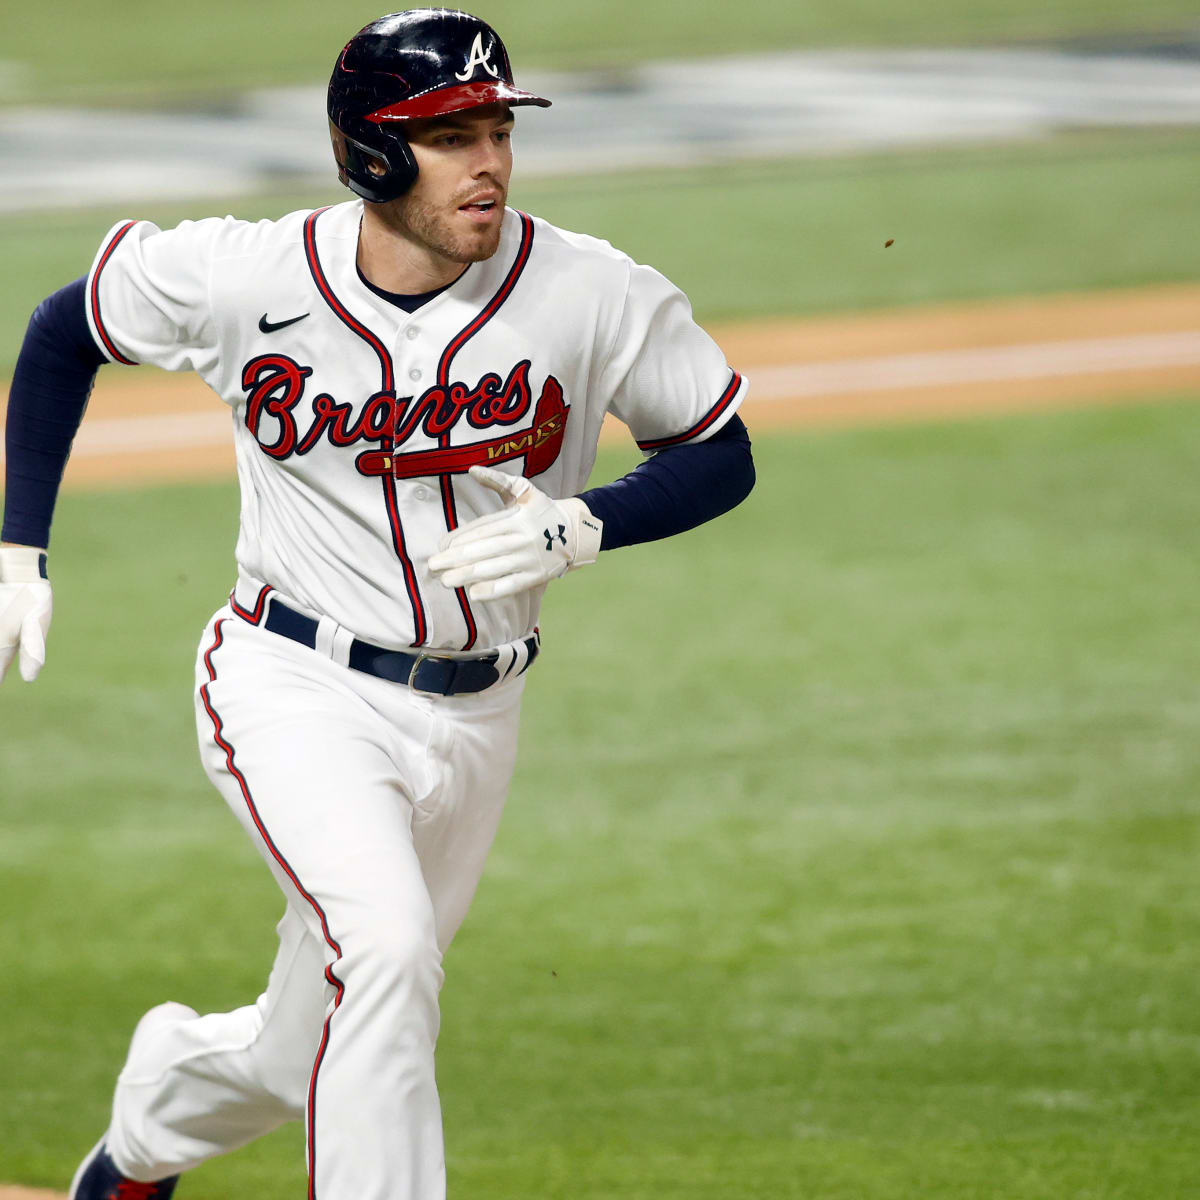 Braves News: NLDS Opening Day, Hank Aaron award finalists, and